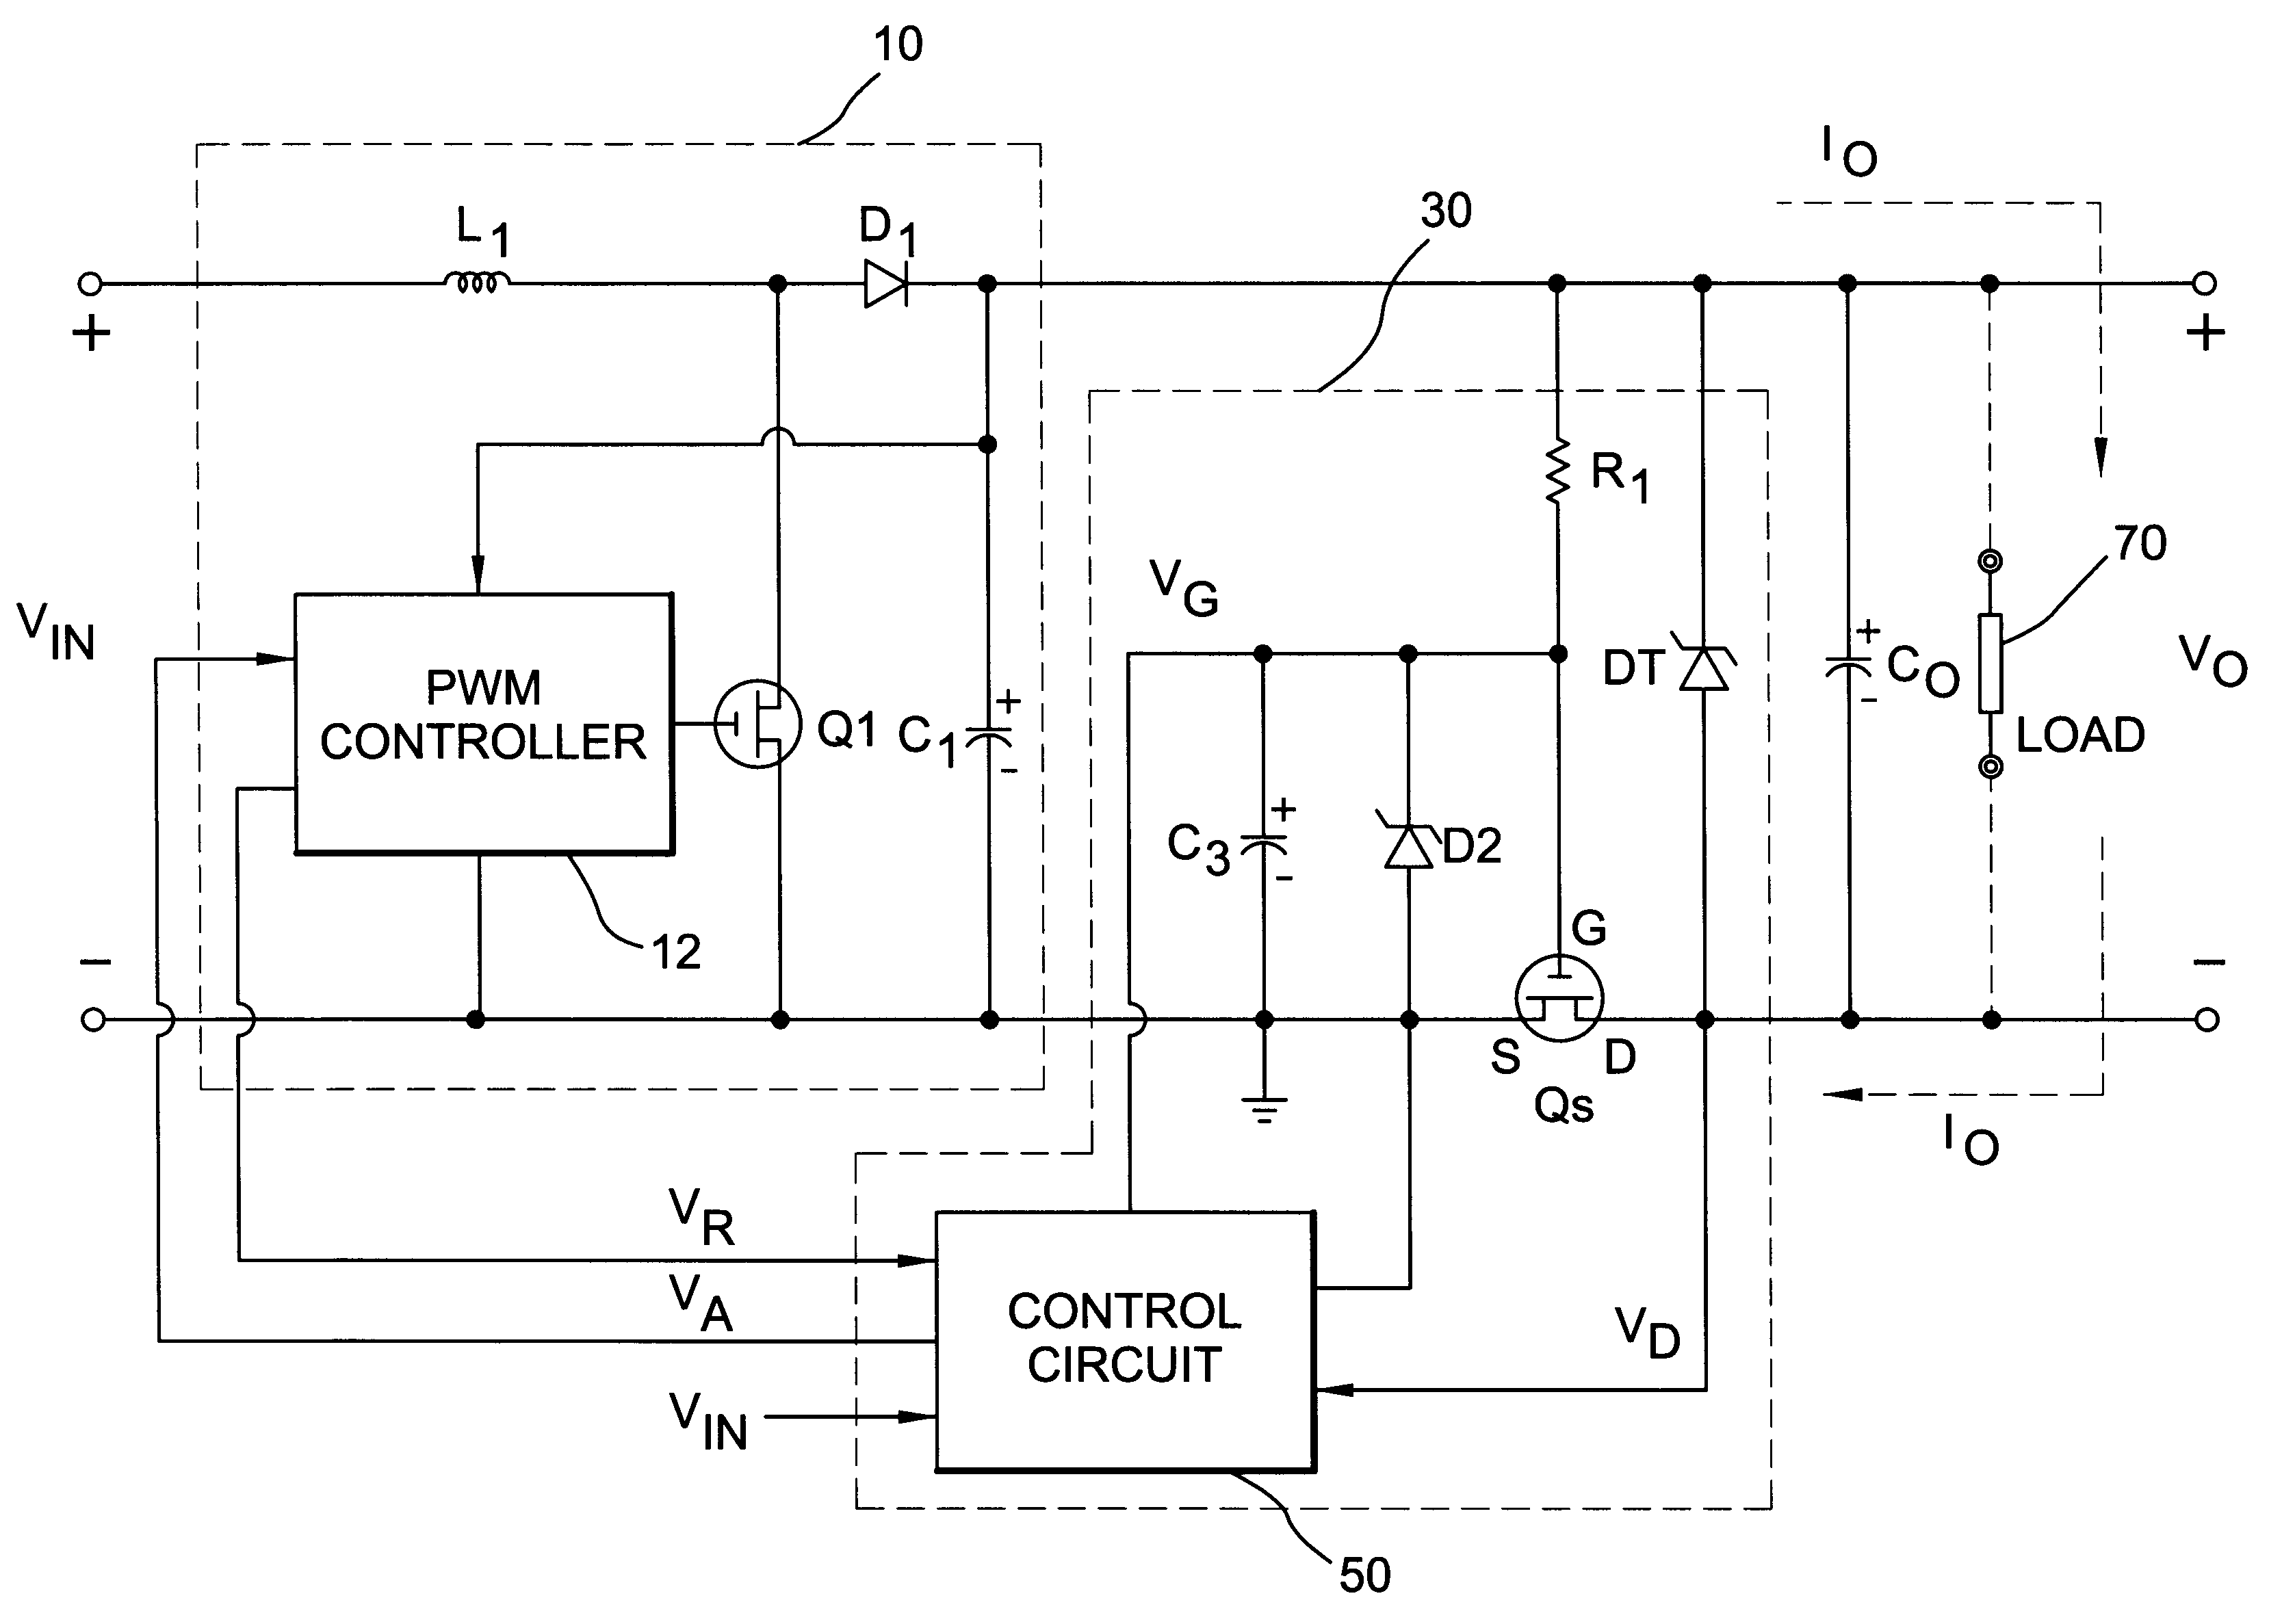 Protection circuit for a boost power converter